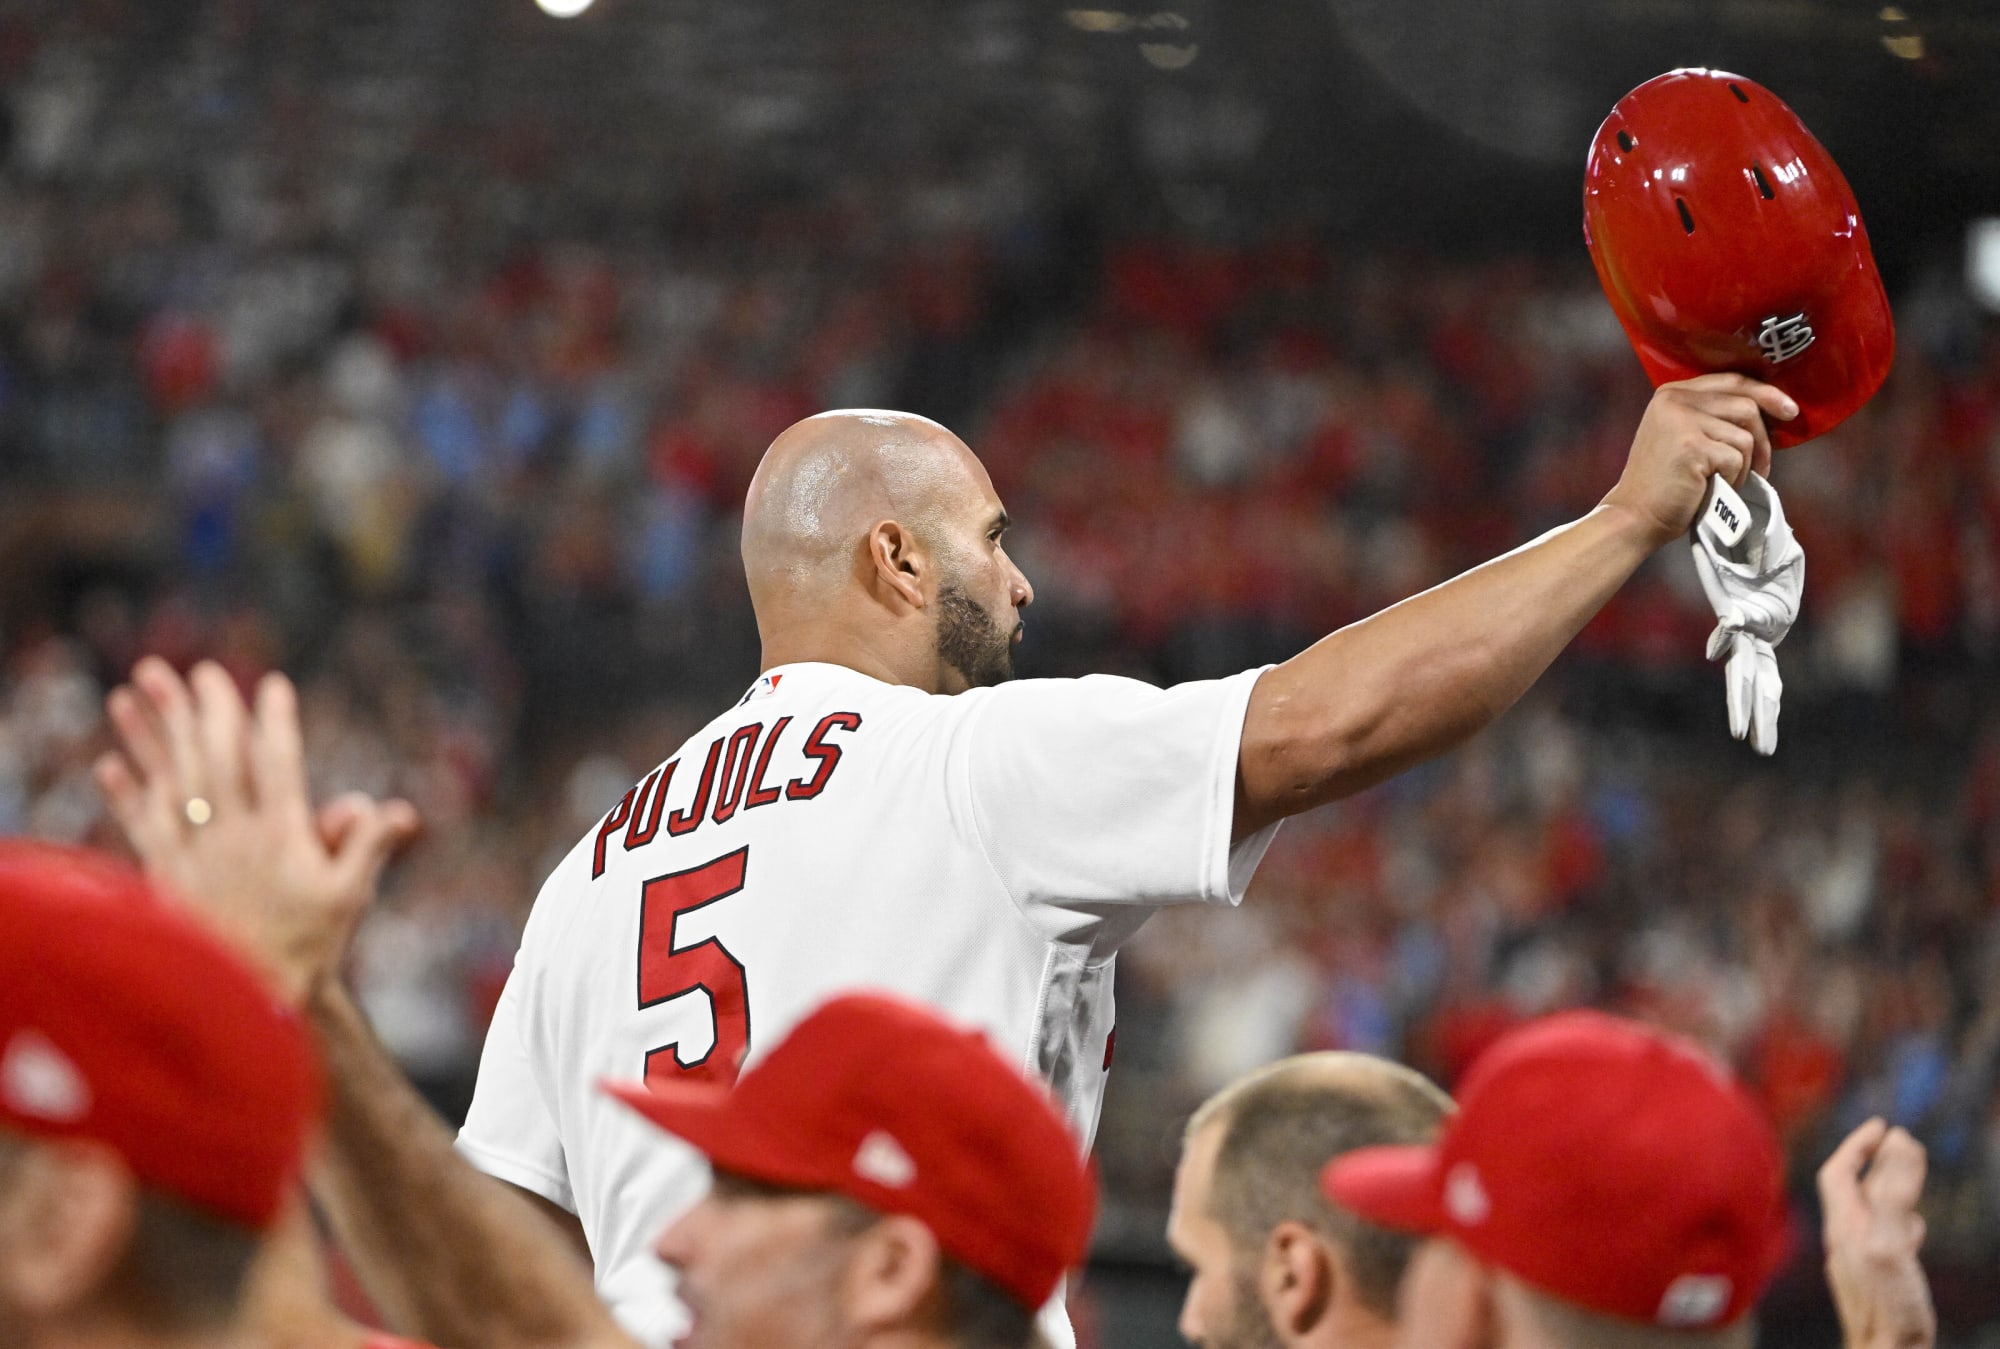 Albert Pujols steps closer to 700 with another clutch home run for Cardinals (Video)